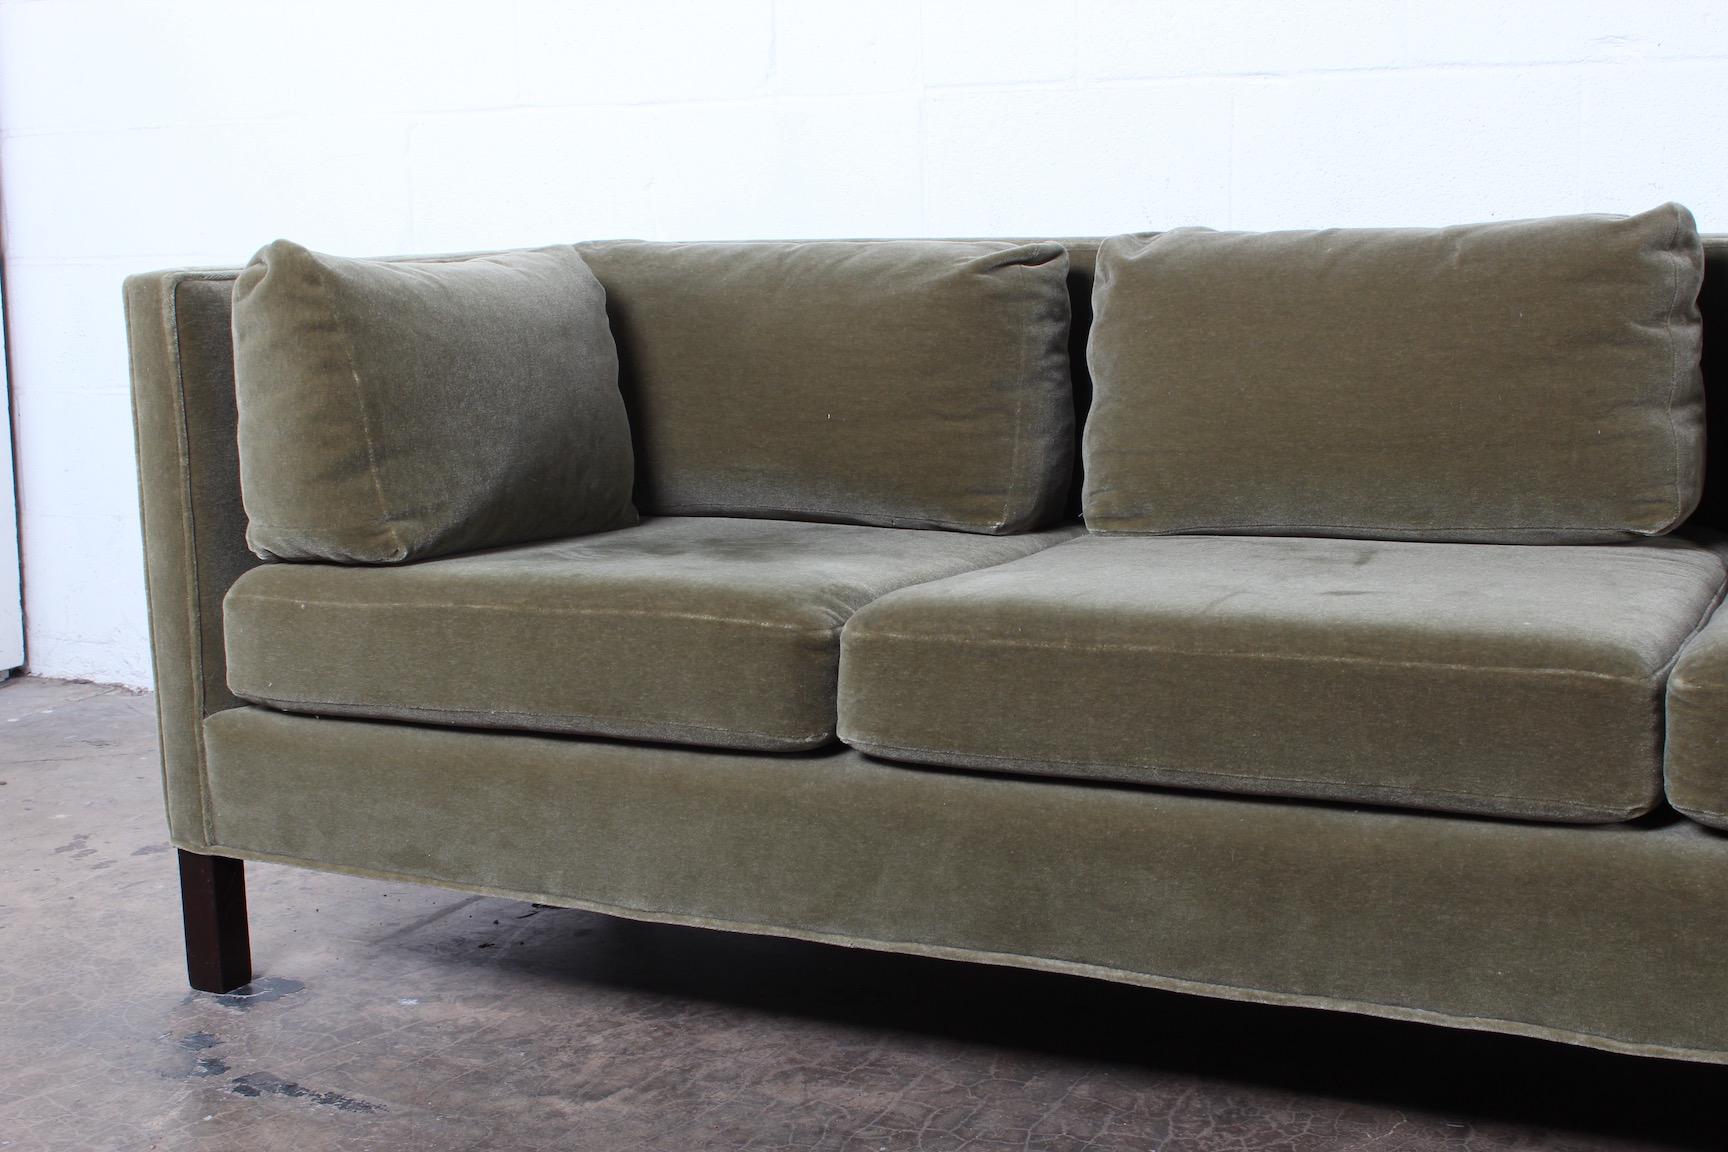 A one arm sofa designed by Edward Wormley for Dunbar in mohair.